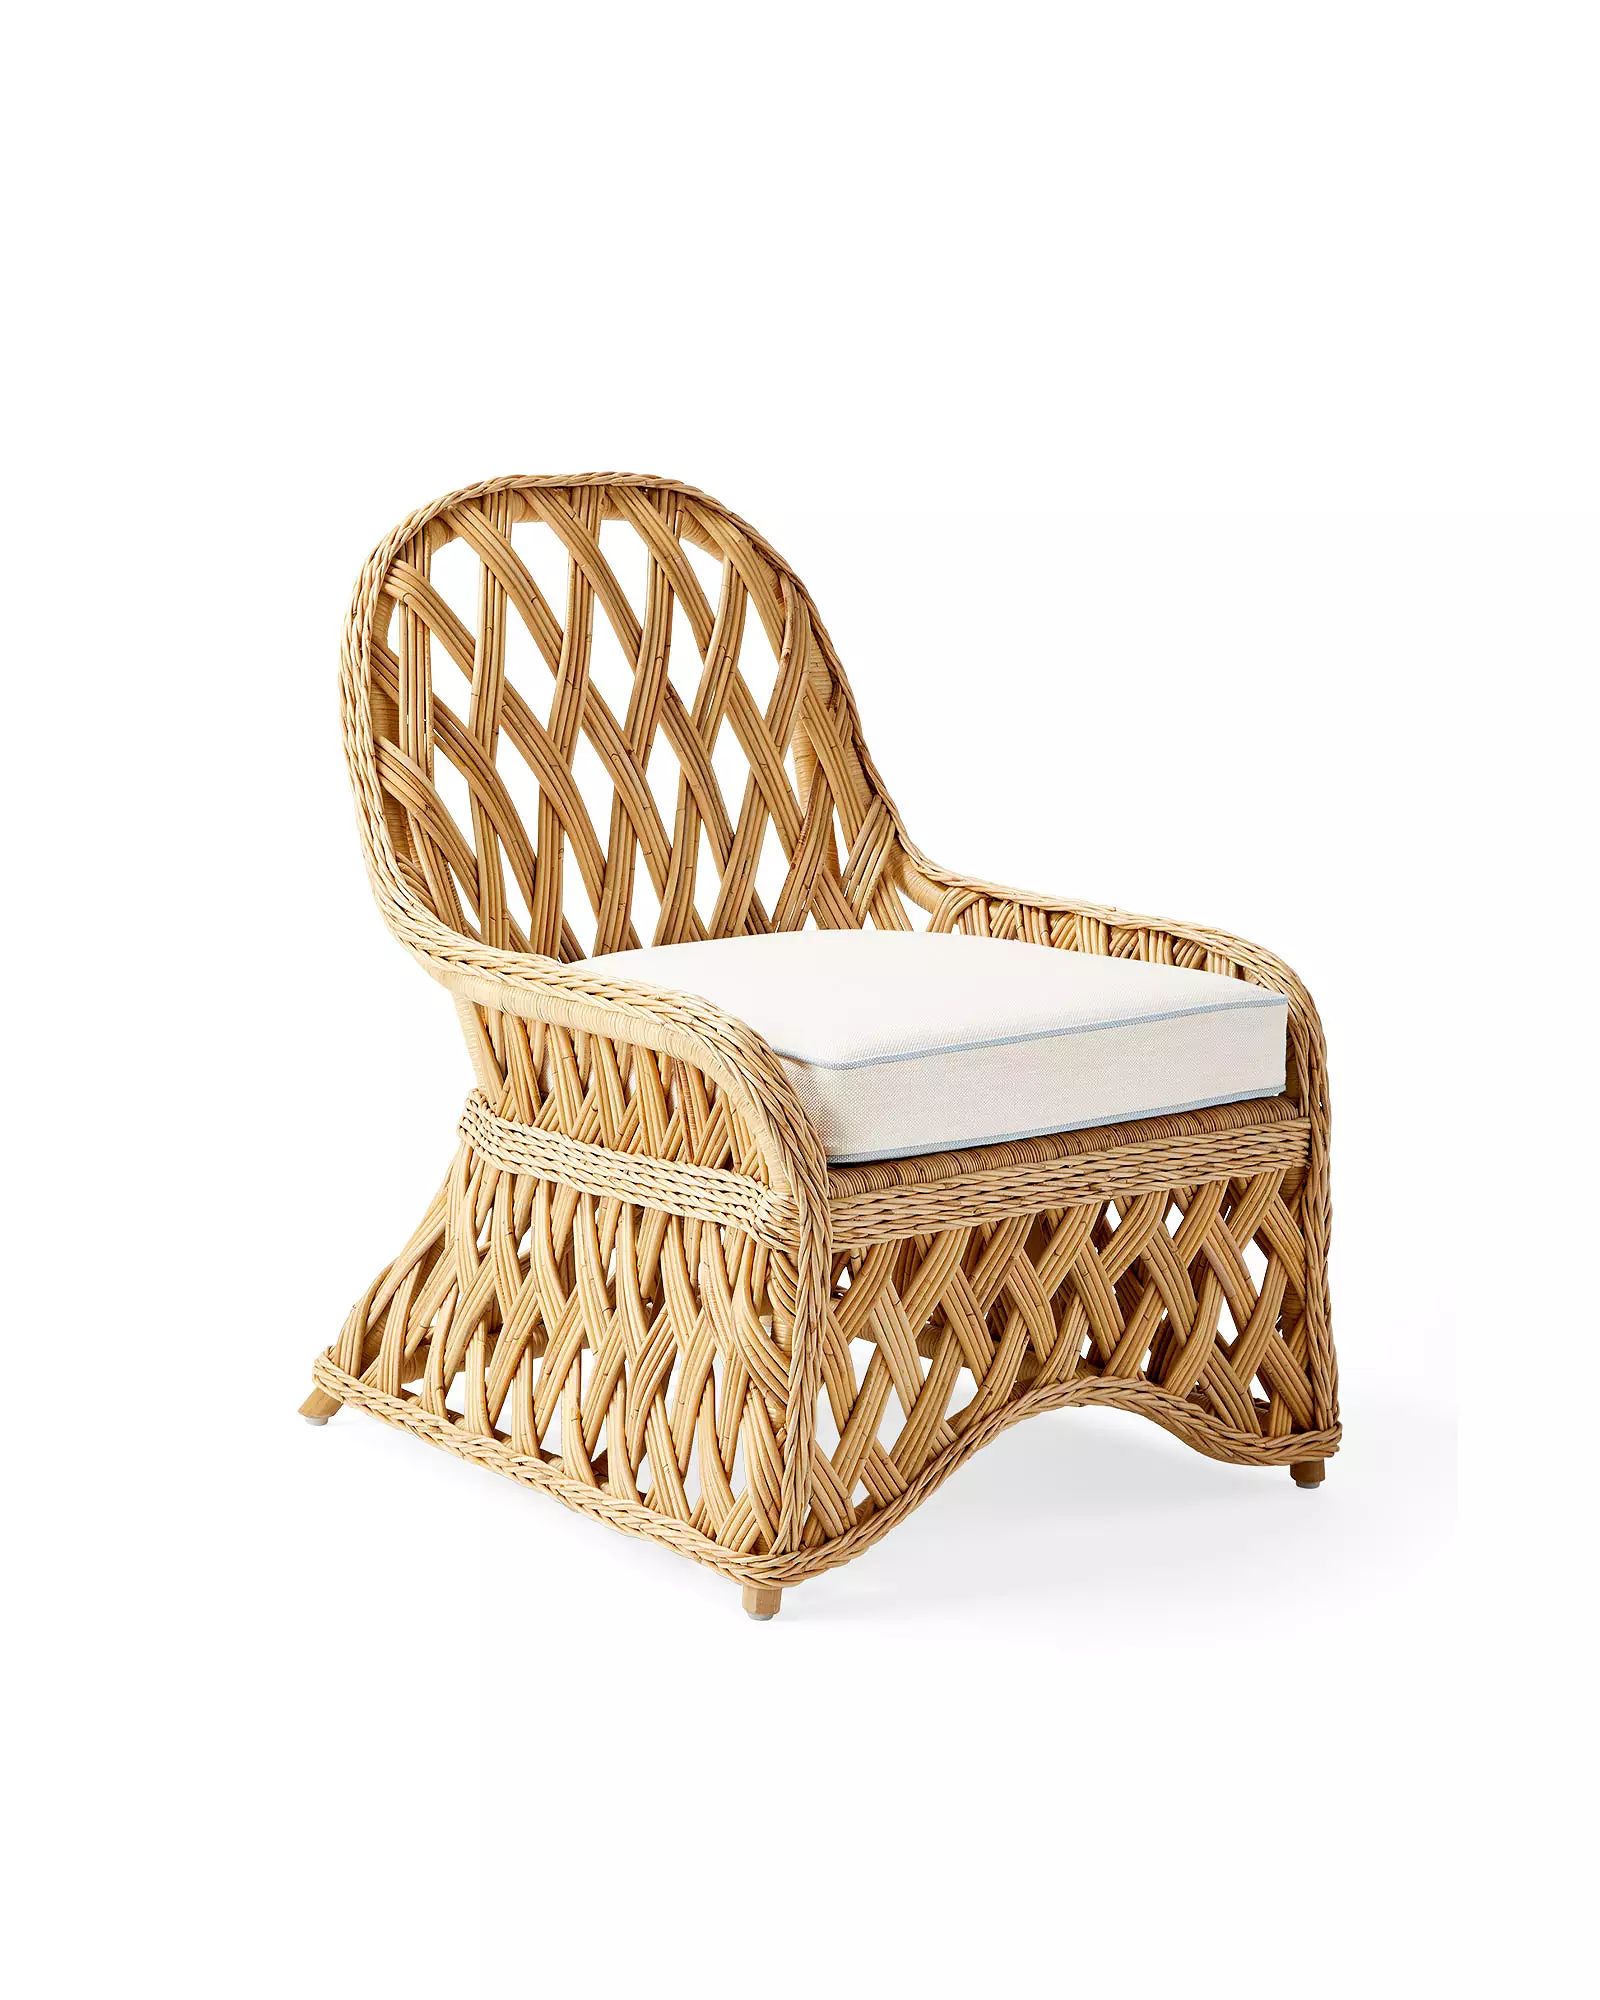 Round Hill Rattan Chair | Serena and Lily